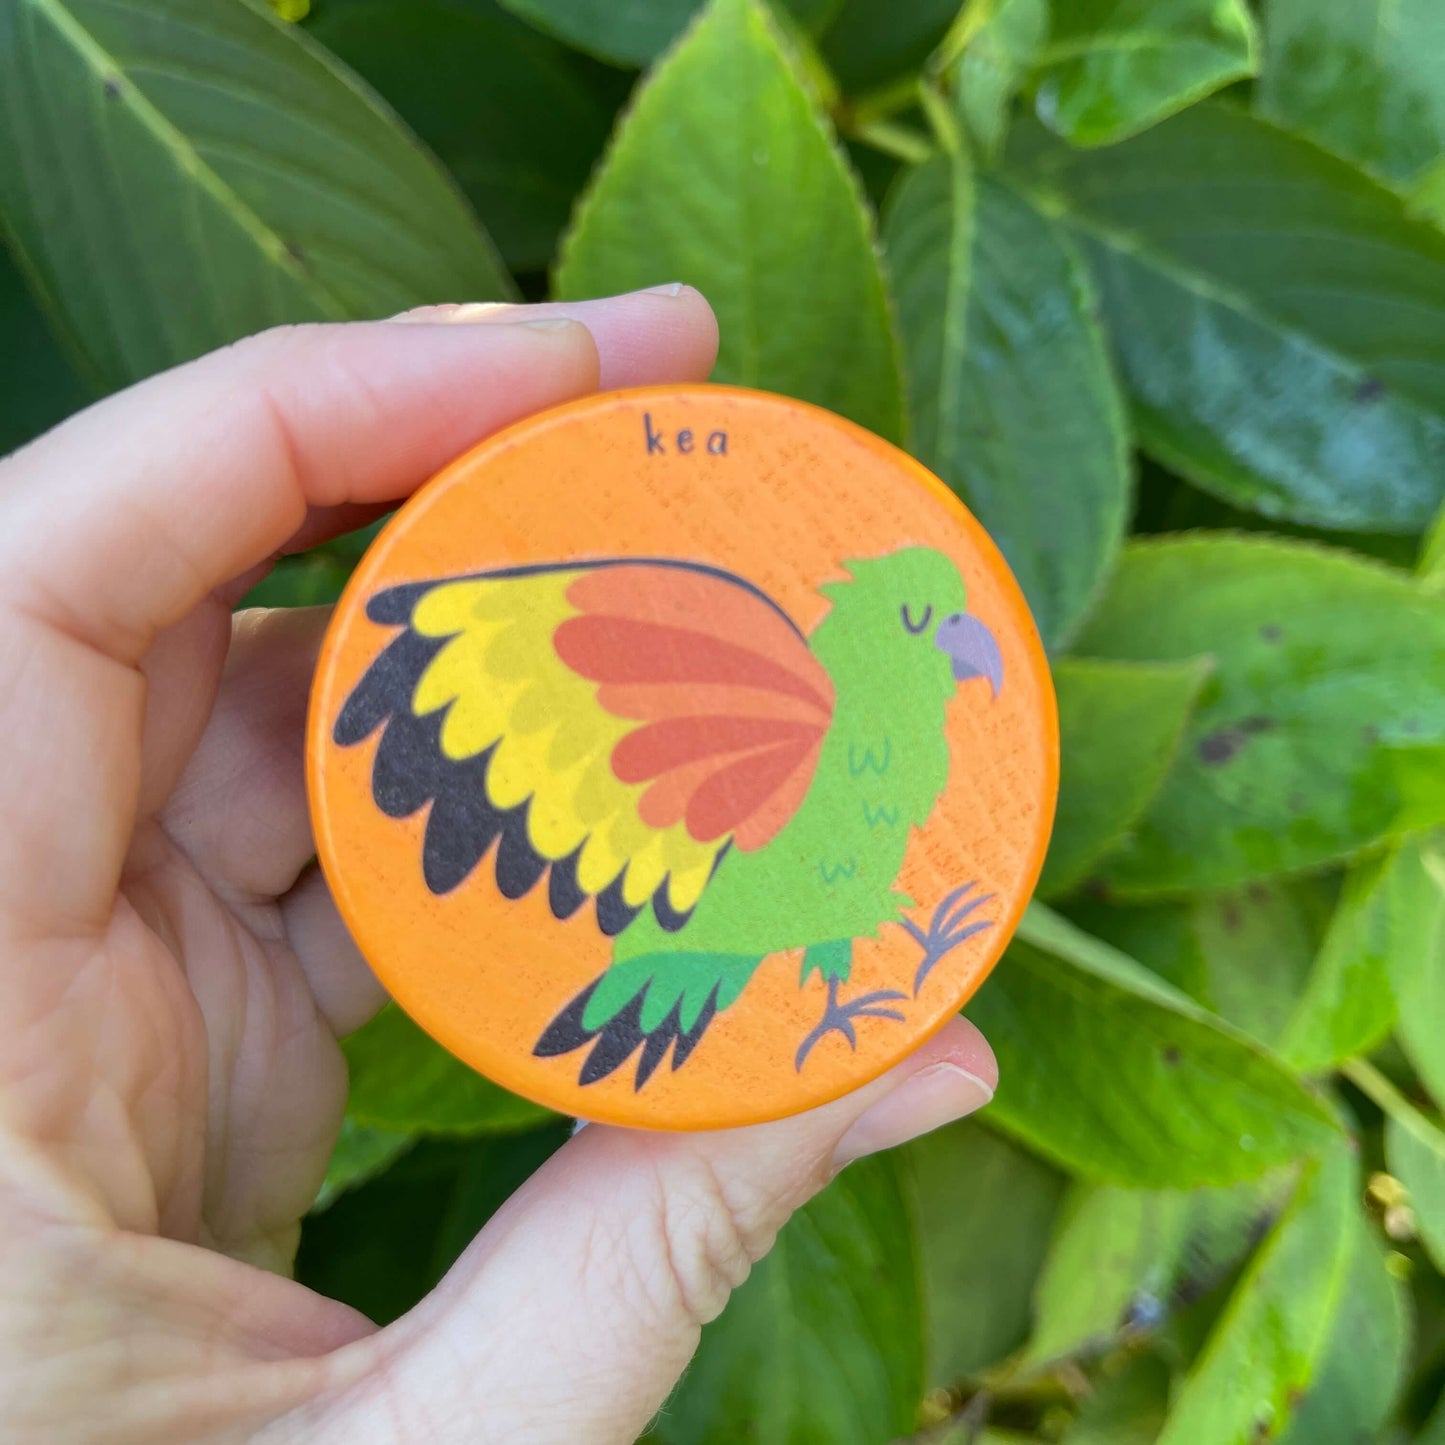 Womens hand holding a bright orange wooden yoyo with a Kea bird painted on it.